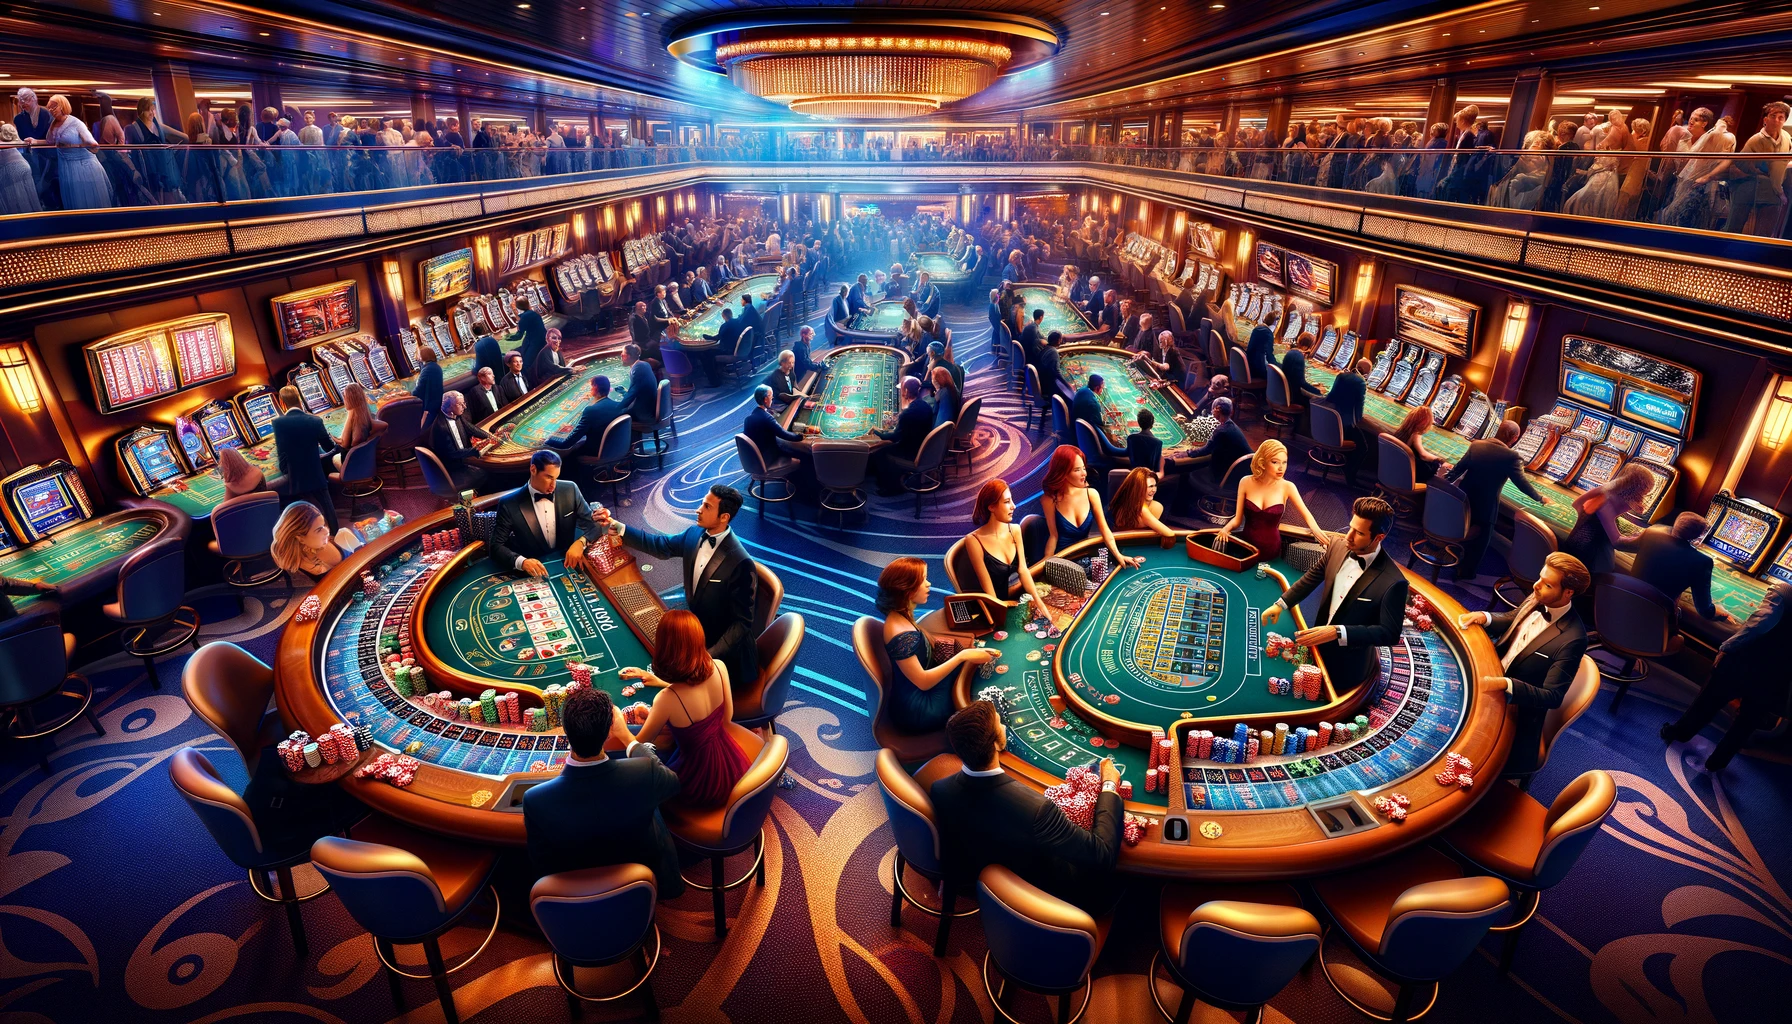 the vibrant nightlife and casino entertainment aboard the Sun Princess